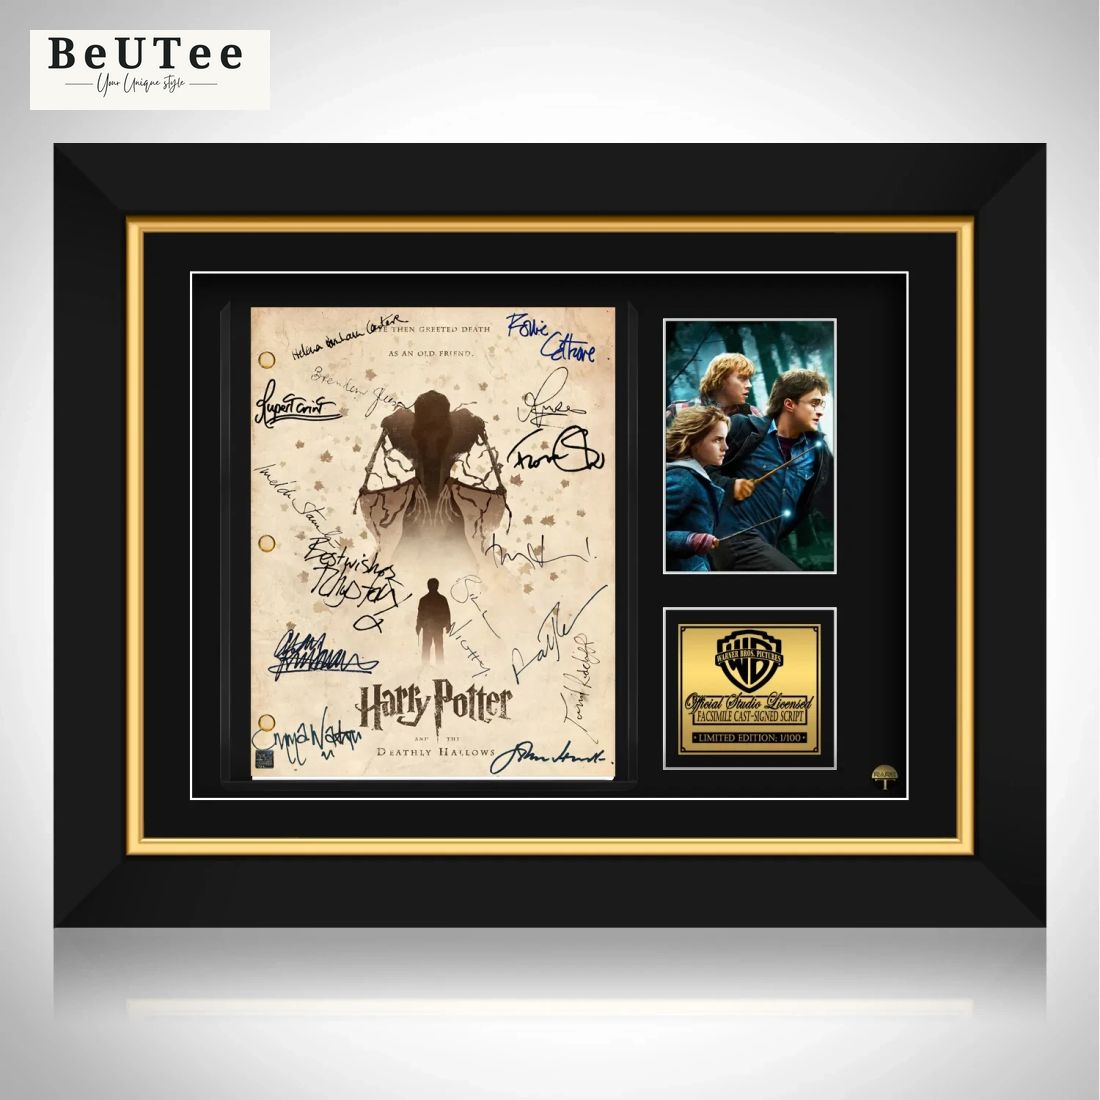 harry potter and deathly hallows limited signature edition poster 1 RDhGg